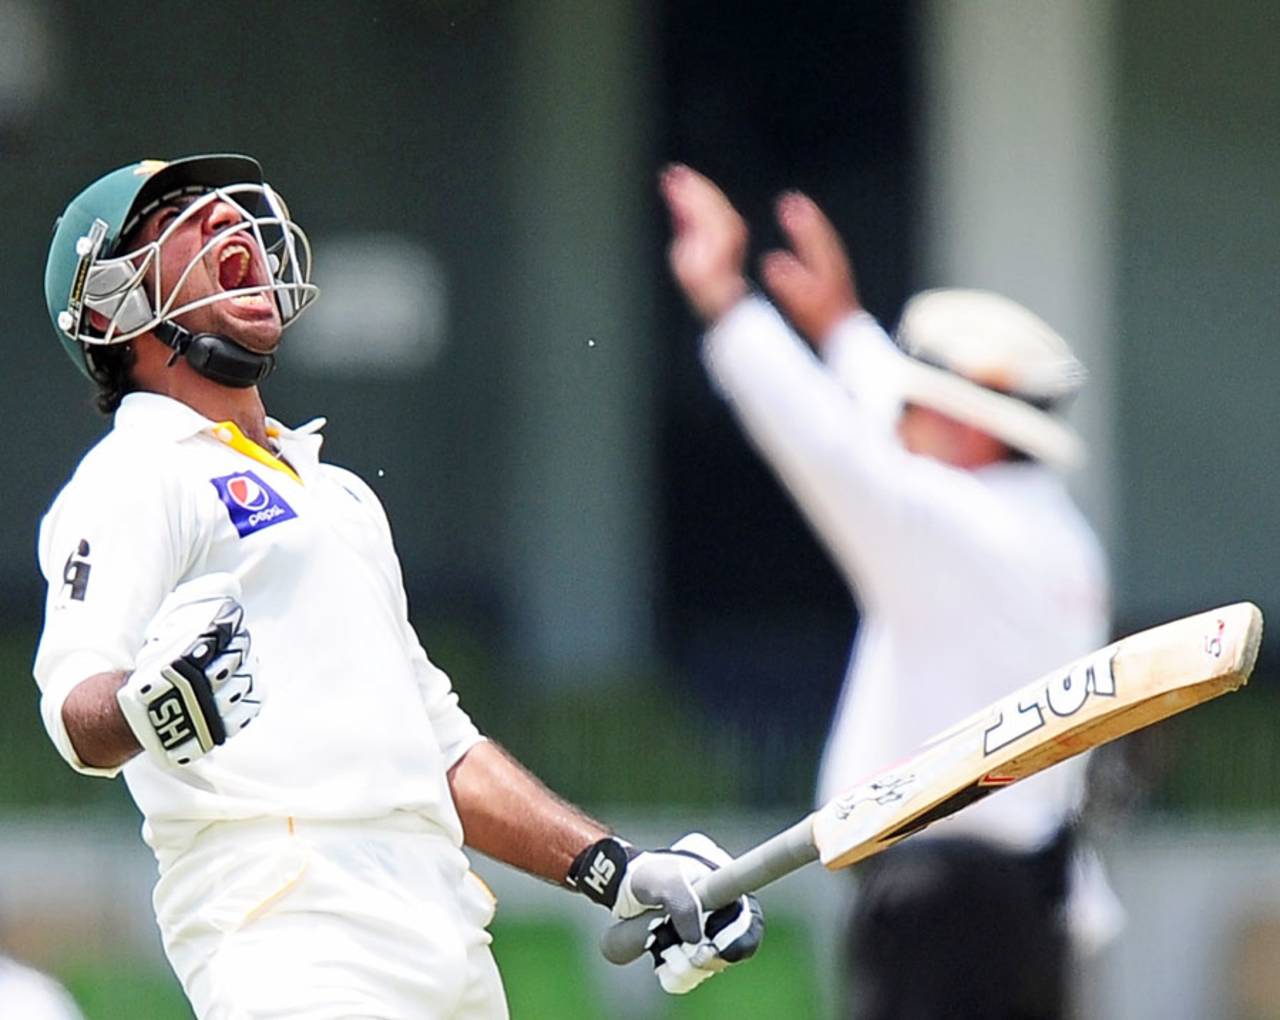 Sarfraz Ahmed exults after scoring his maiden Test hundred, Sri Lanka v Pakistan, 2nd Test, Colombo, 3rd day, August 16, 2014